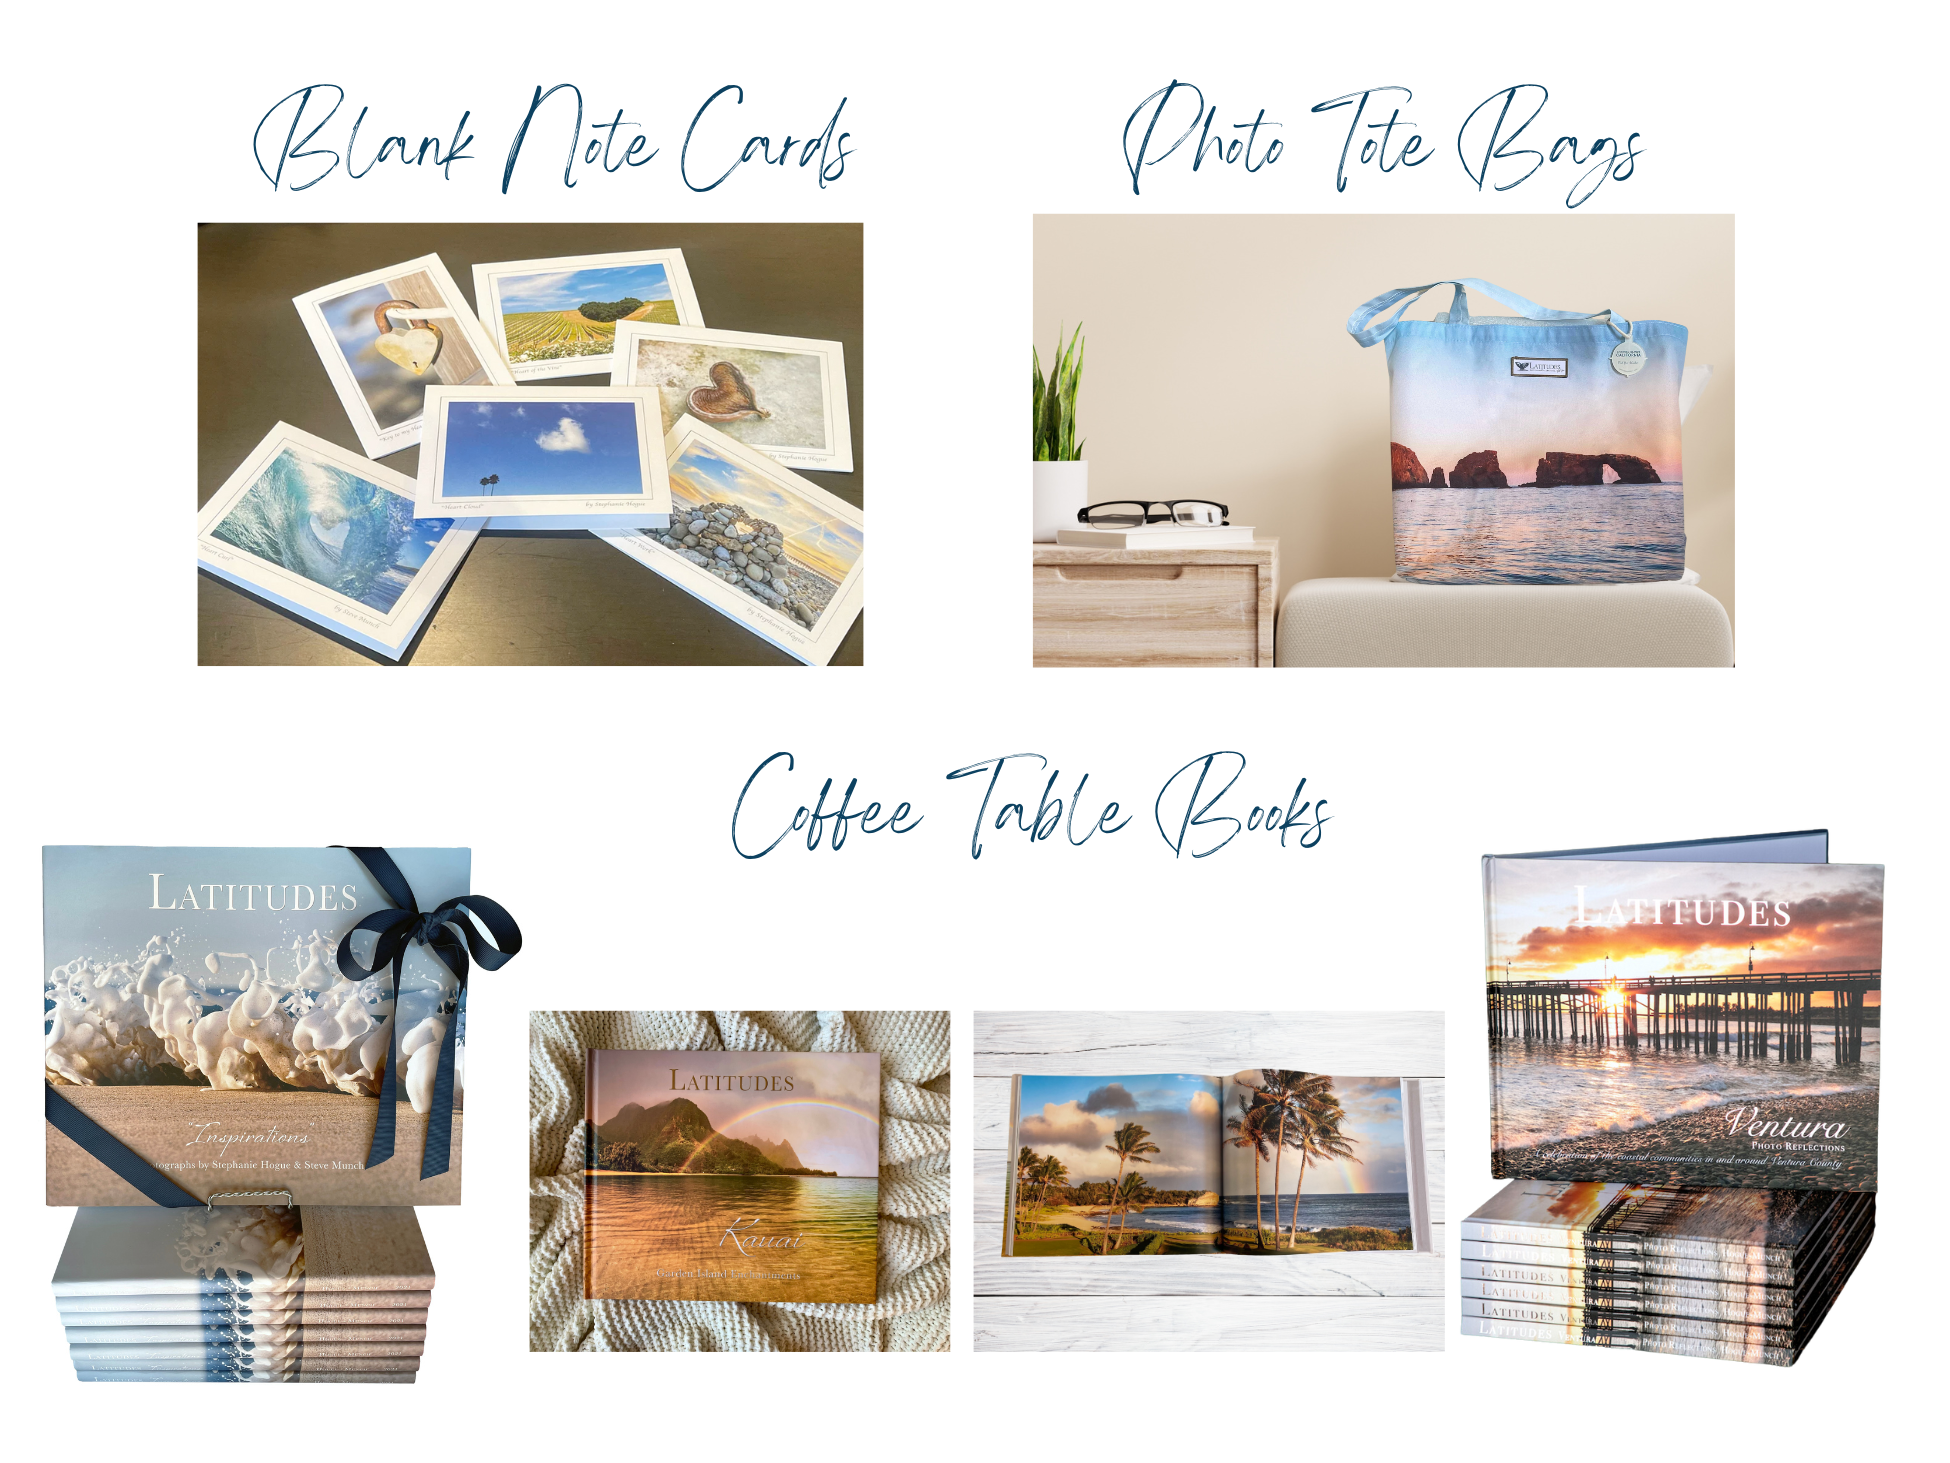 featured gifts: photo tote bag, blank note cards, photo coffee table books